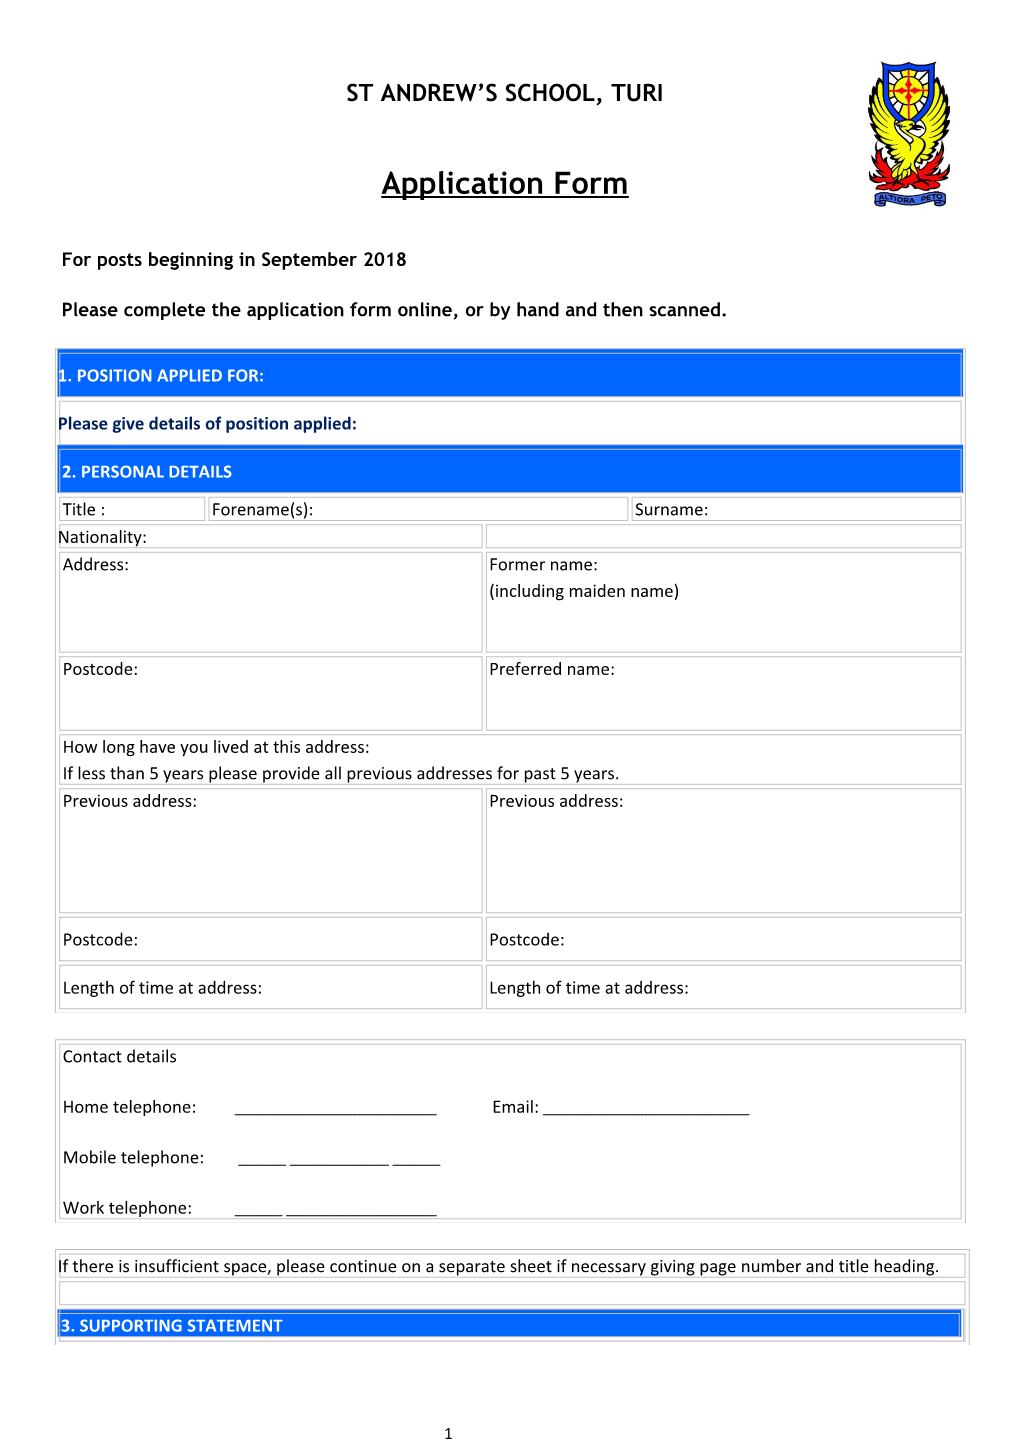 Please Complete the Application Form Online, Or by Hand and Then Scanned